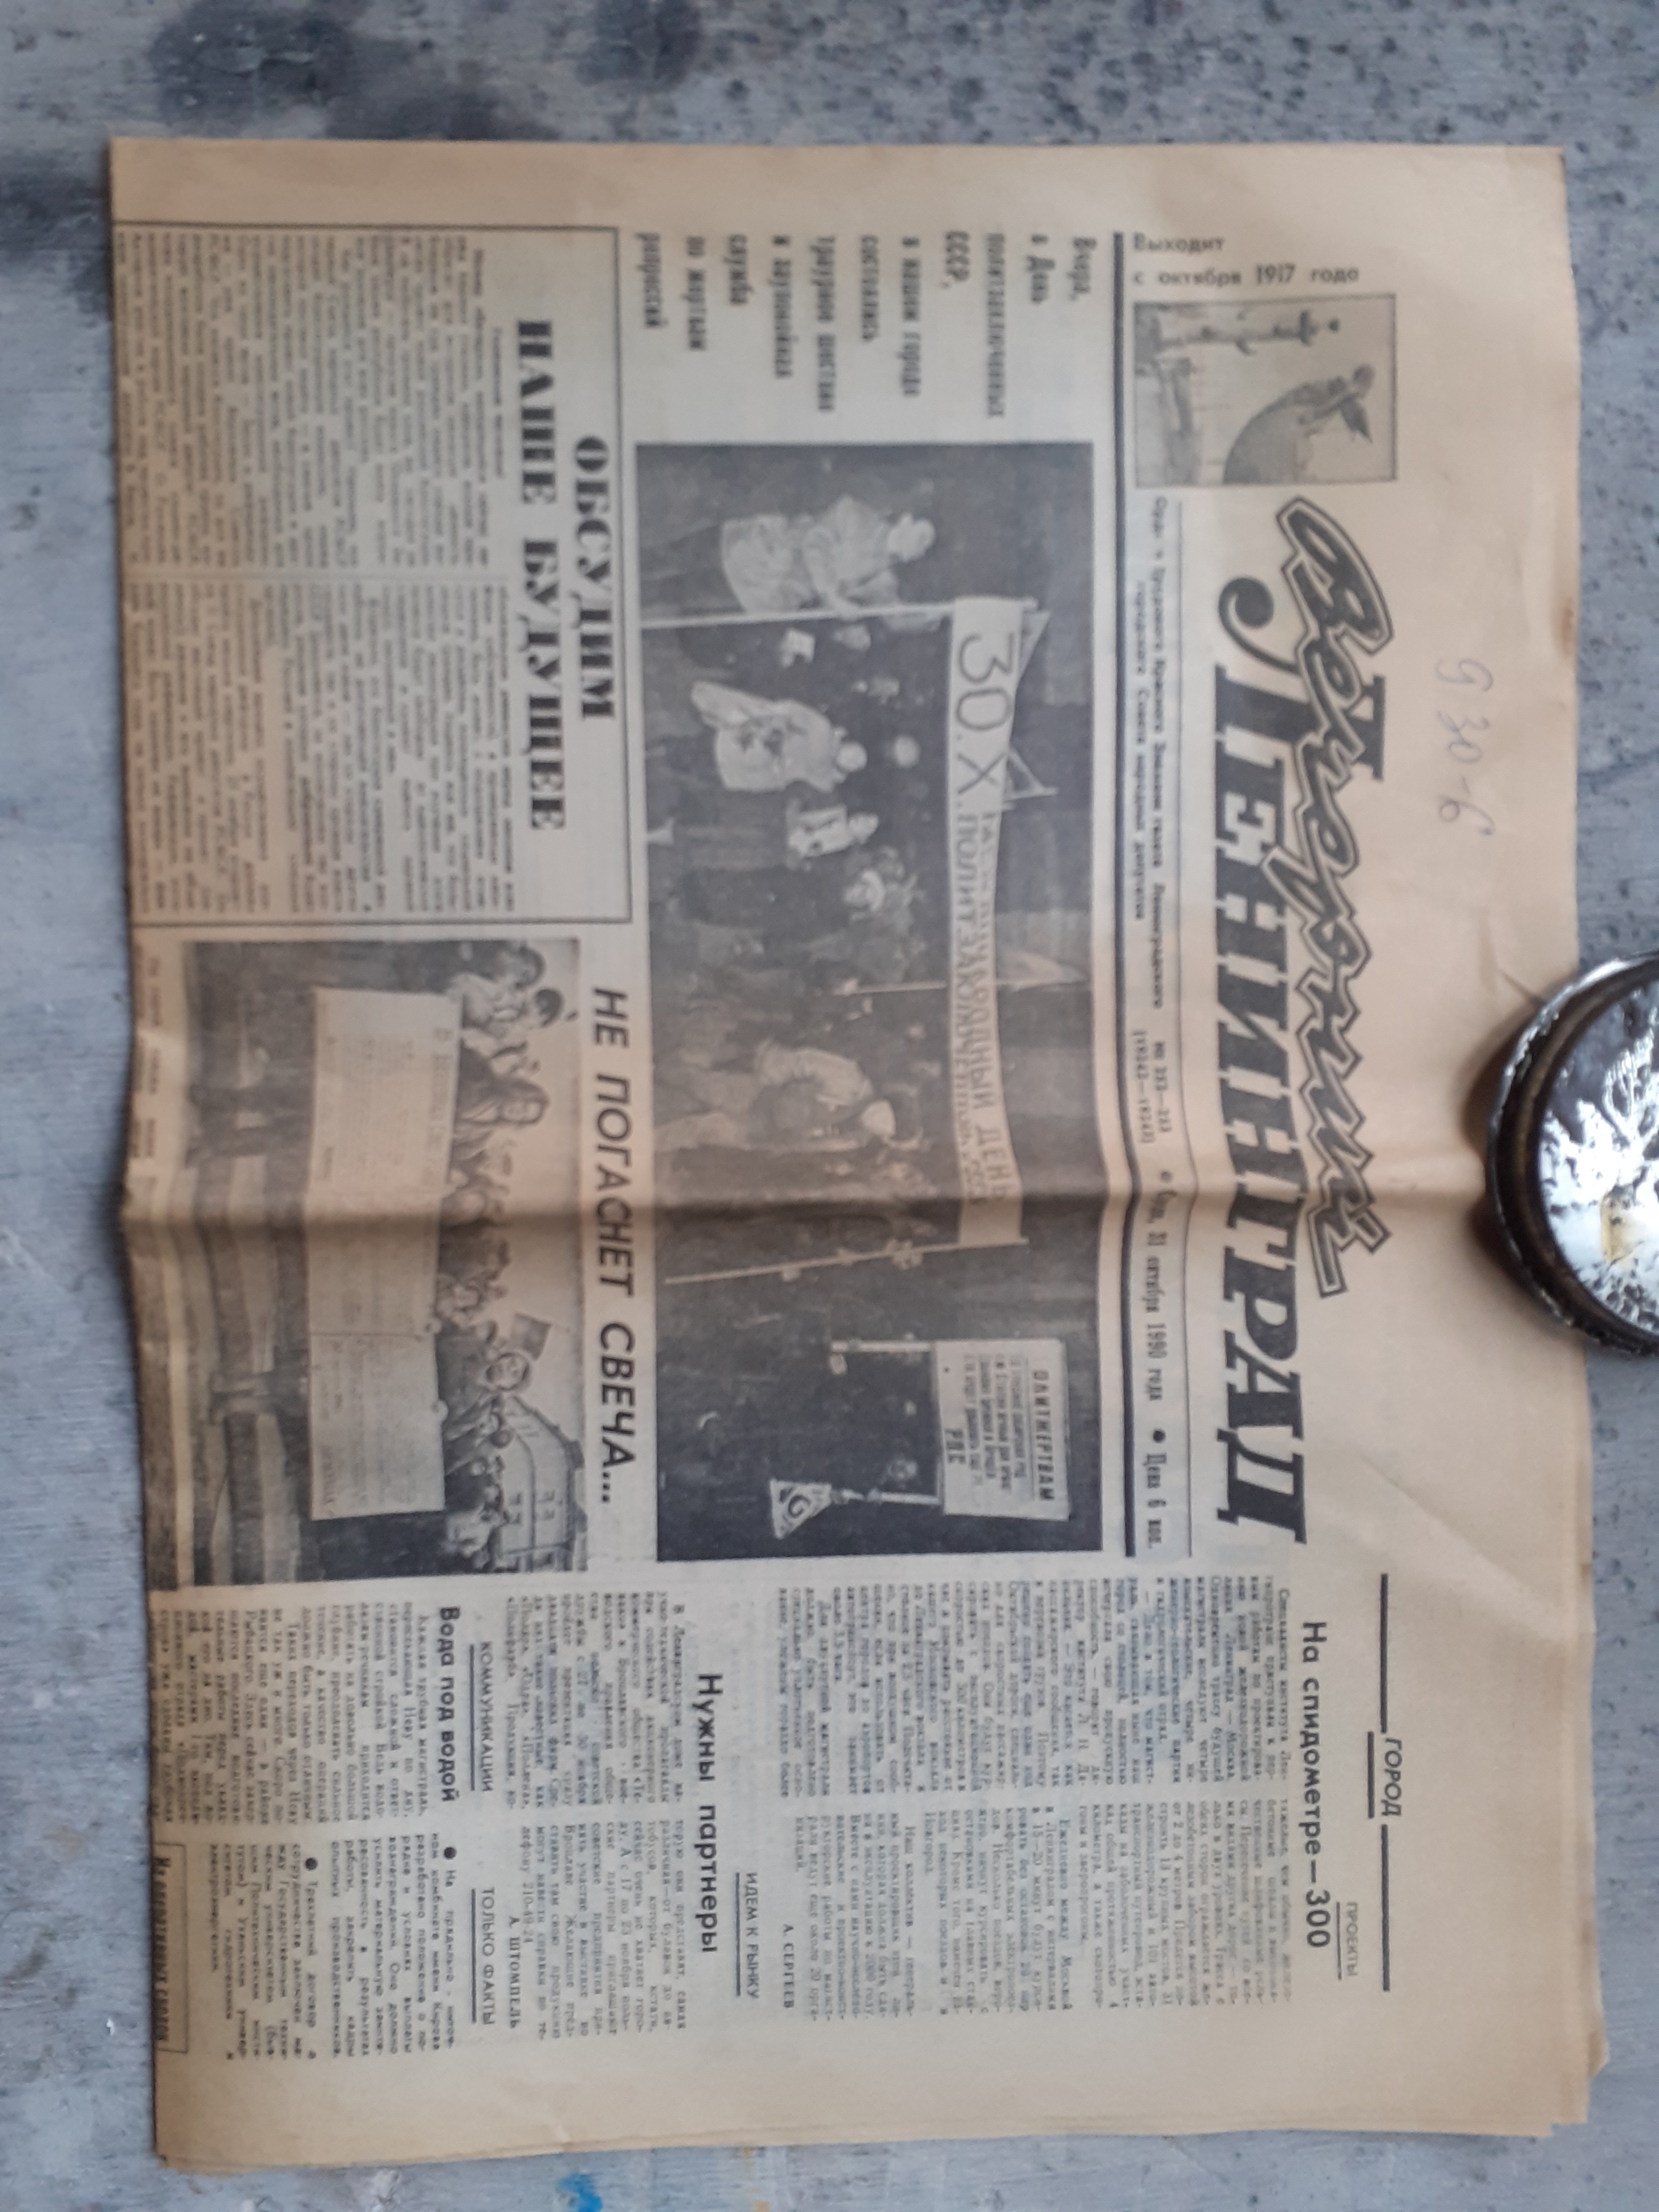 Time Capsule 4 - Conclusion - My, Old things, 80-е, 90th, 2000s, Tickets, Childhood of the 90s, Past, Memories, Zx spectrum, Putsch, Bulletin, Elections, Longpost, Nostalgia